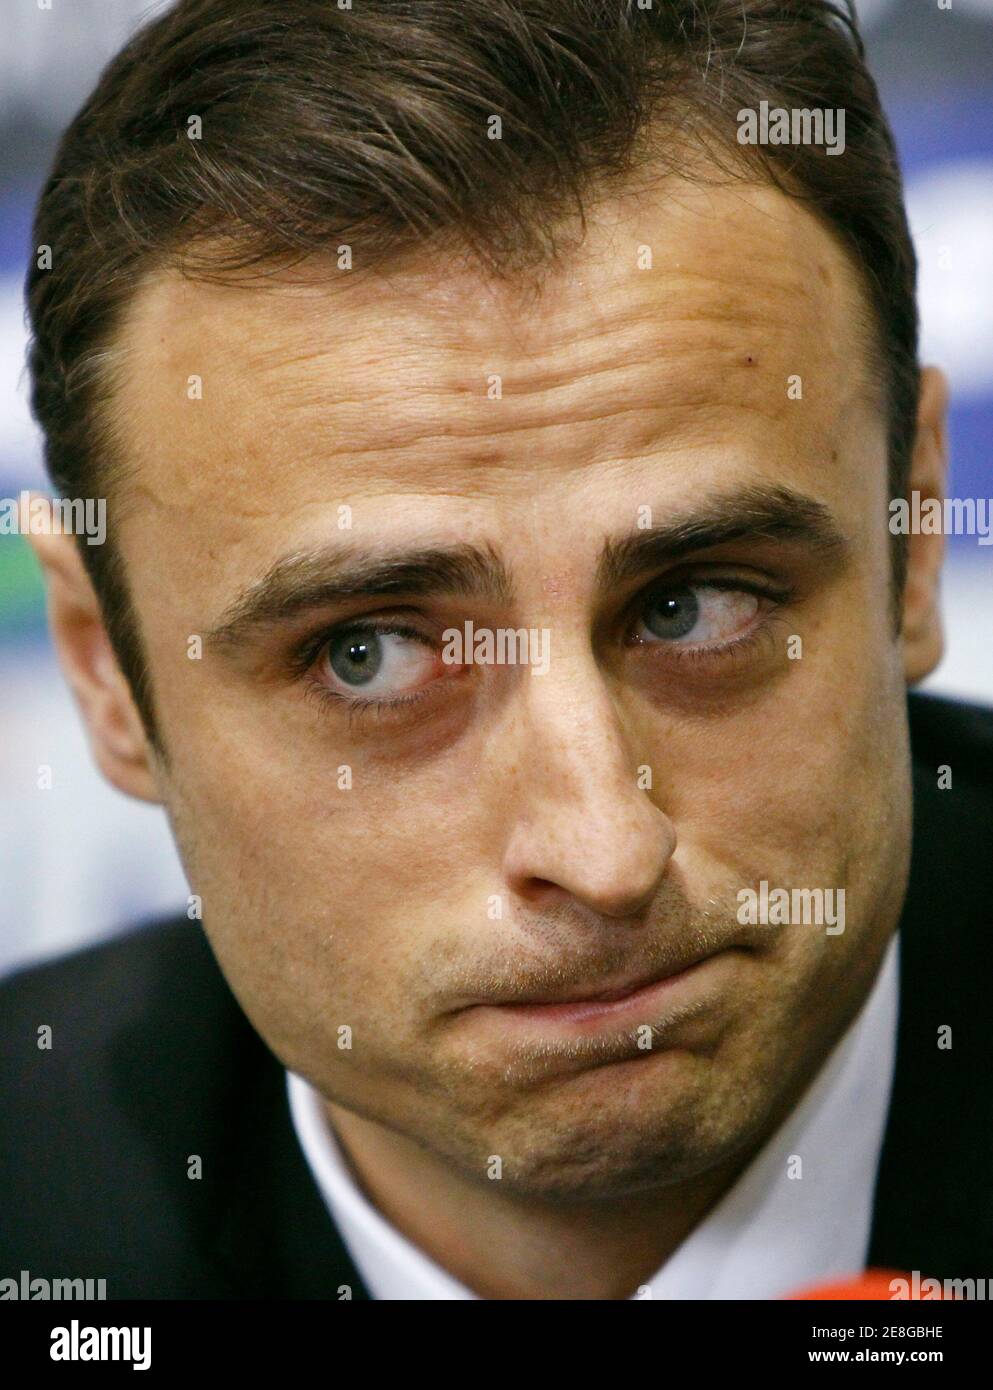 Captain of Bulgarian soccer team and Manchester United's striker Dimitar Berbatov attends a news conference in Sofia, May 13, 2010. Berbatov has decided to quit the national team, he said on Thursday. 'It was a difficult decision but sometimes we have to take difficult decisions,' the 29-year-old Manchester United striker told a news conference at the Vasil Levski national stadium. REUTERS/Oleg Popov (BULGARIA - Tags: SPORT SOCCER HEADSHOT) Stock Photo